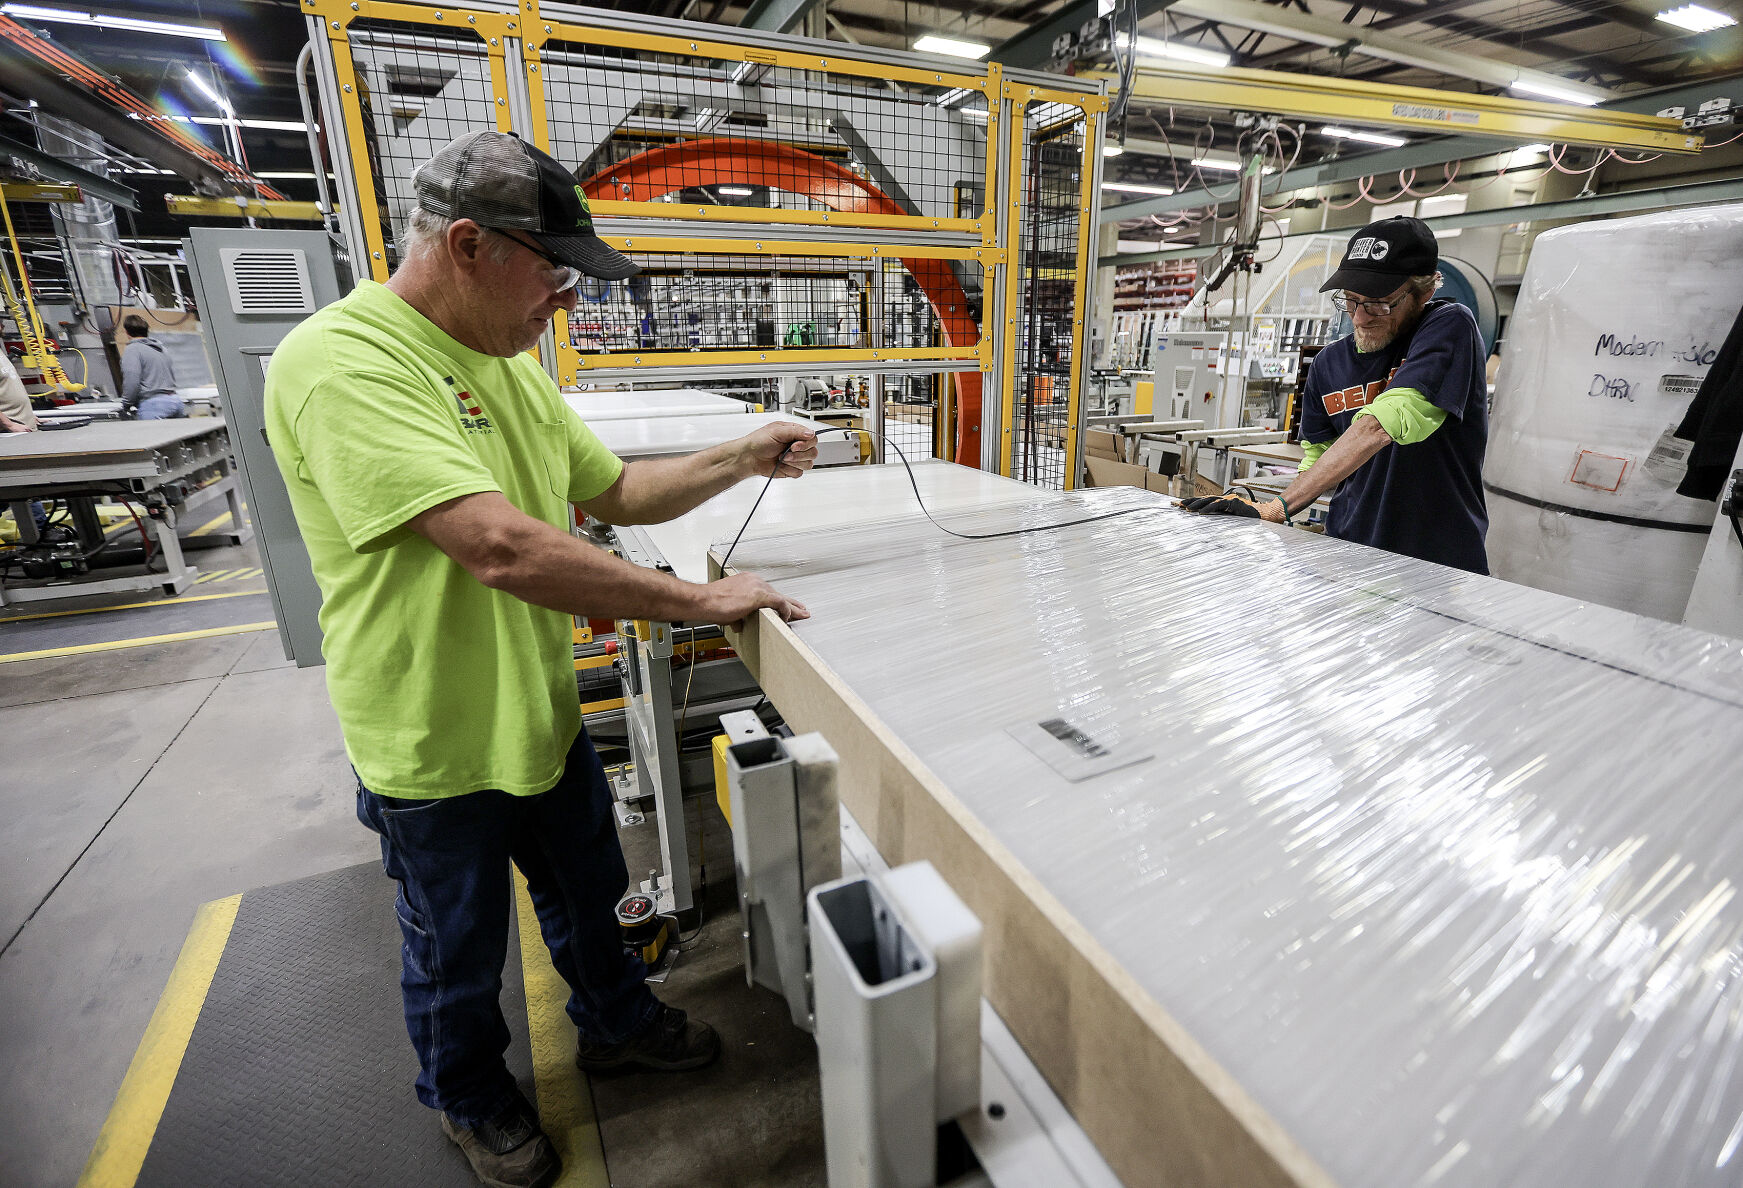 Modernfold employees Steve Burlage (left) and Joe Krapfl work on shipping a finished product on one of the assembly lines at the Dyersville, Iowa, plant.    PHOTO CREDIT: Dave Kettering Telegraph Herald